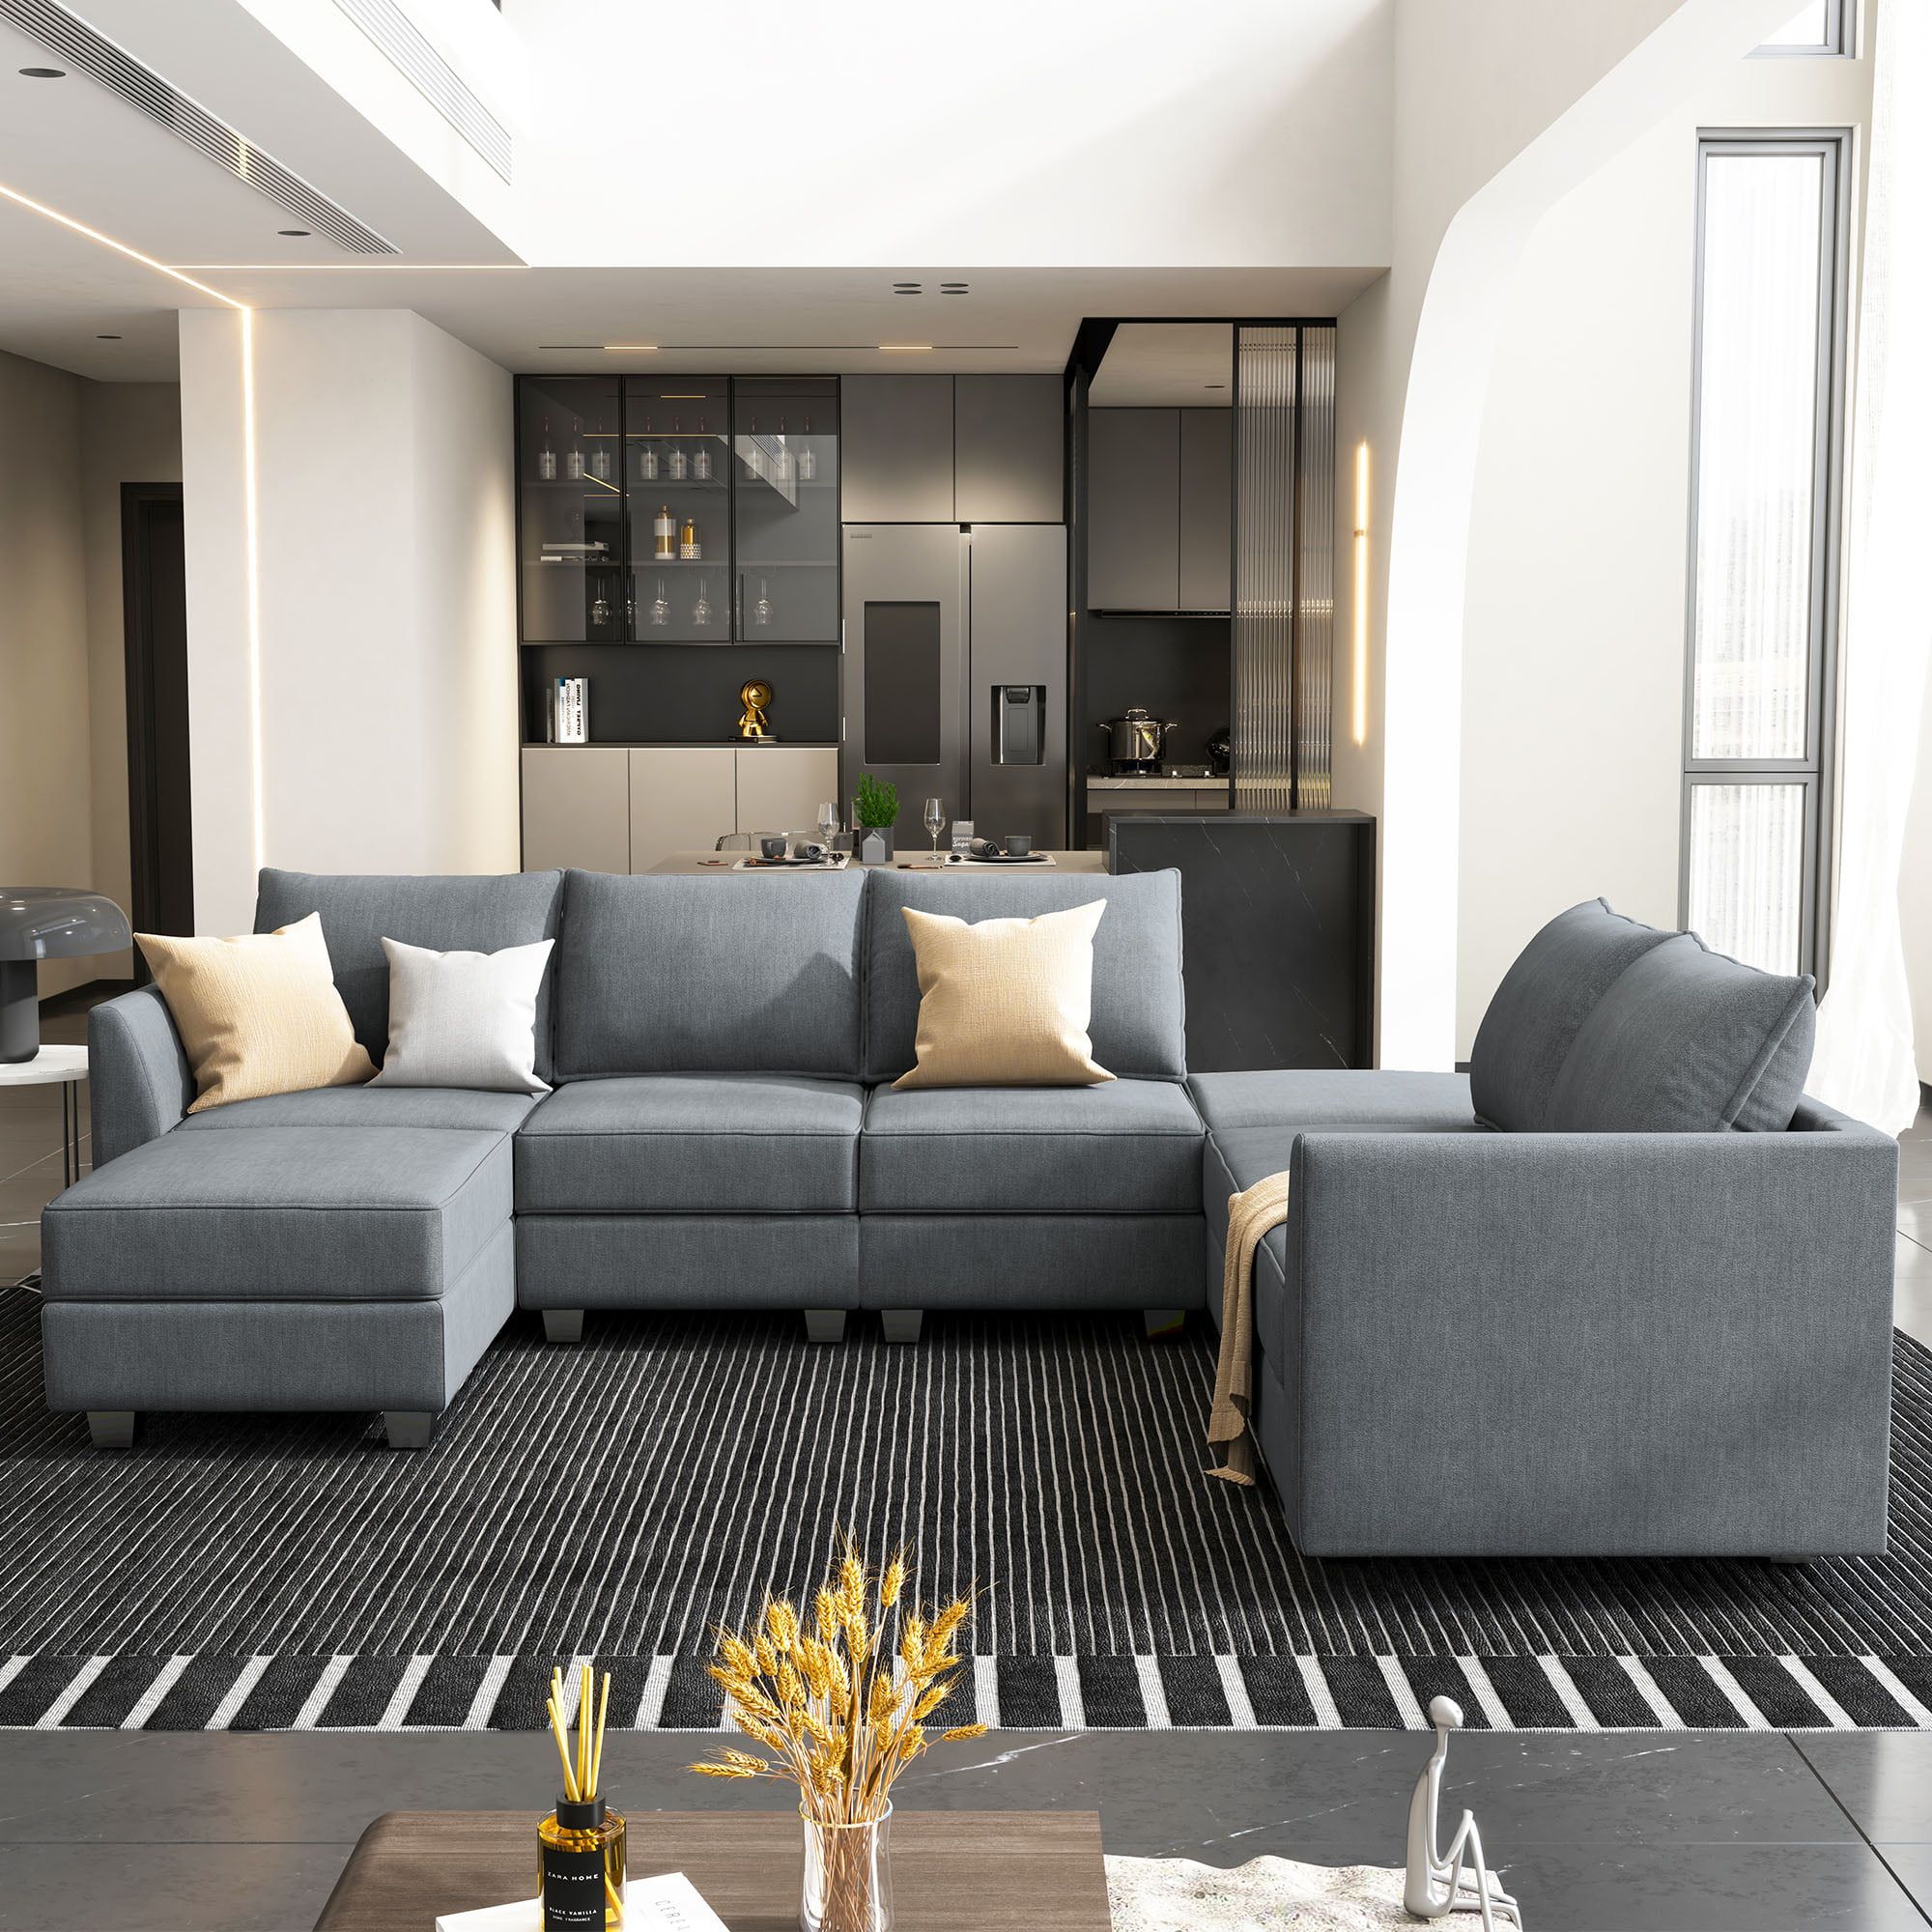 Honbay Modular Sectional Sofa With Reversible Chaises Sofa With Ottomans U  Shaped Sectional Couch For Living Room, Bluish Grey – Walmart In U Shaped Modular Sectional Sofas (View 4 of 15)